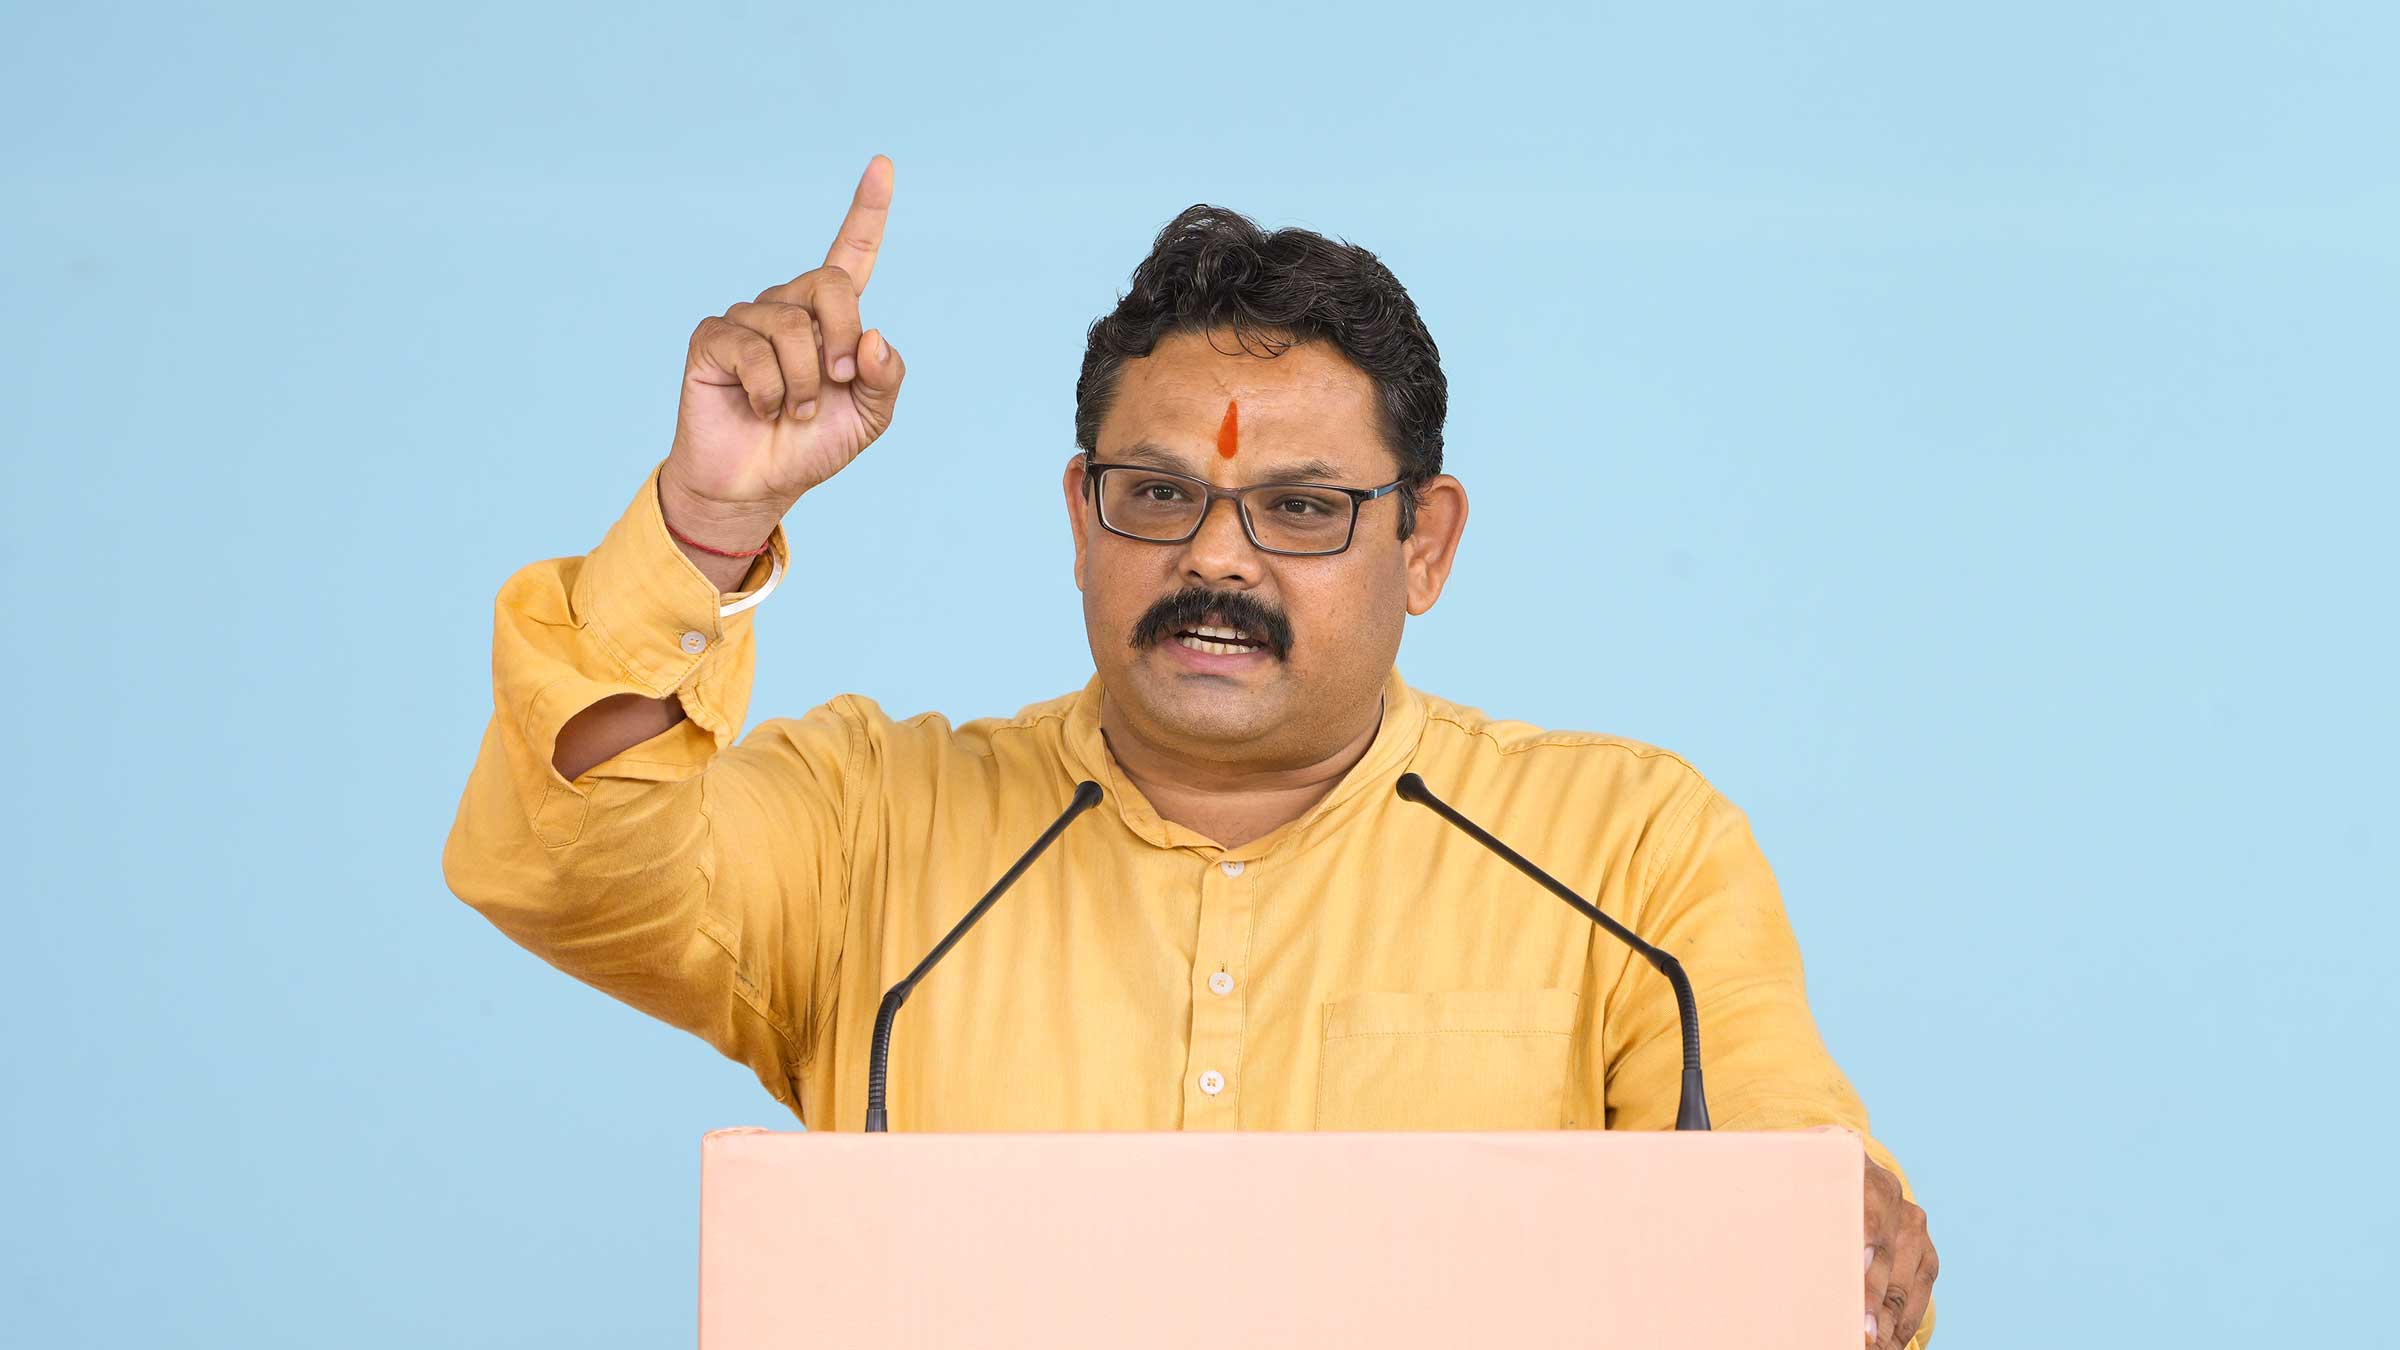 While speaking on the ways to preserve and promote Sanskrut, Dr Ajit Chaudhari (Principal, Yashwantrao Chavan Polytechnic, Beed, Maharashtra) said – It would be most appropriate to use Sanskrut for providing education on Dharma, bringing about awakening on Dharma and its protection.